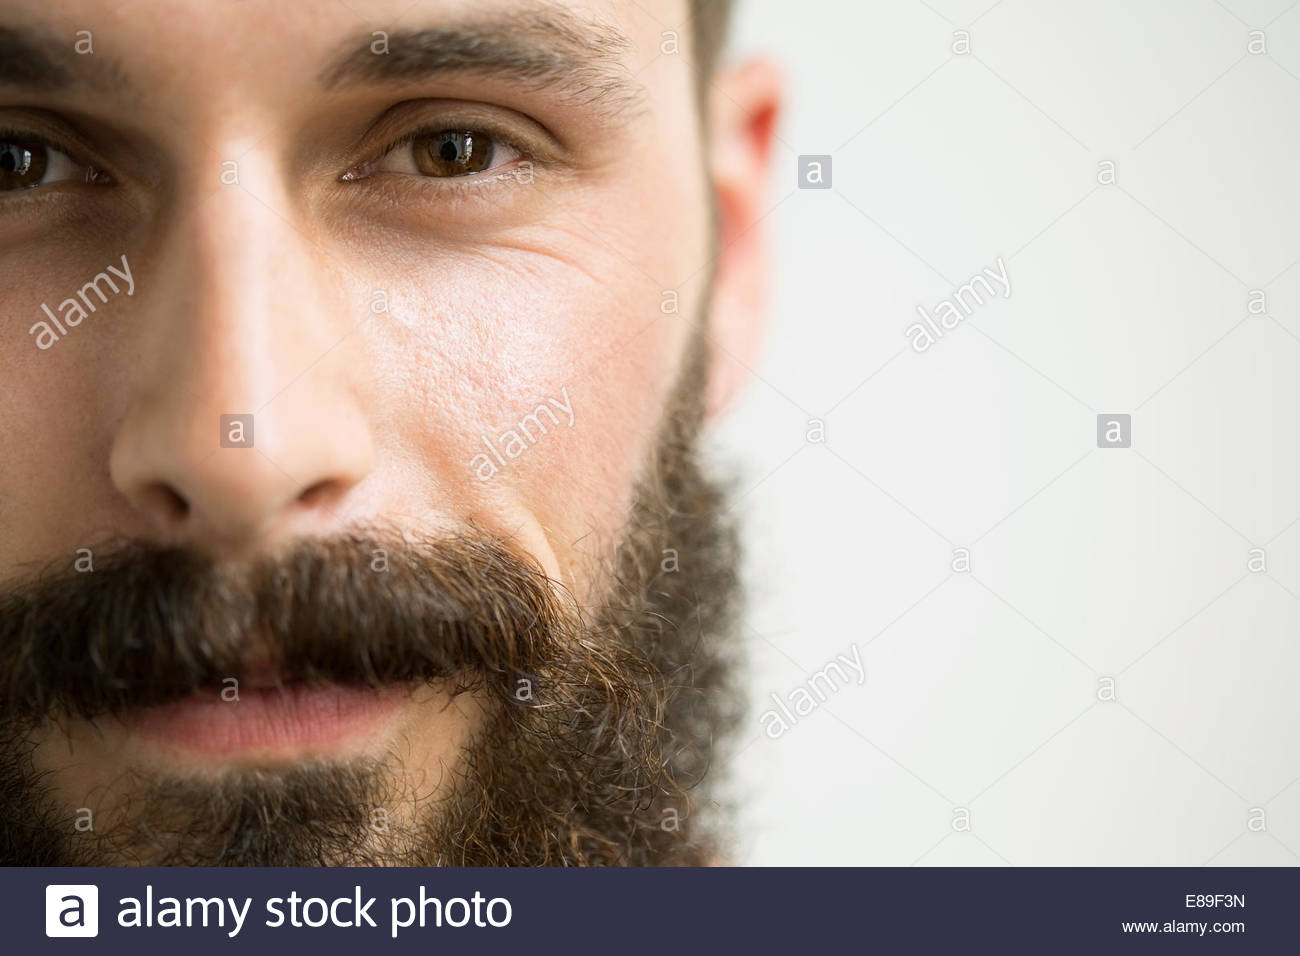 Close up portrait of man with beard Stock Photo